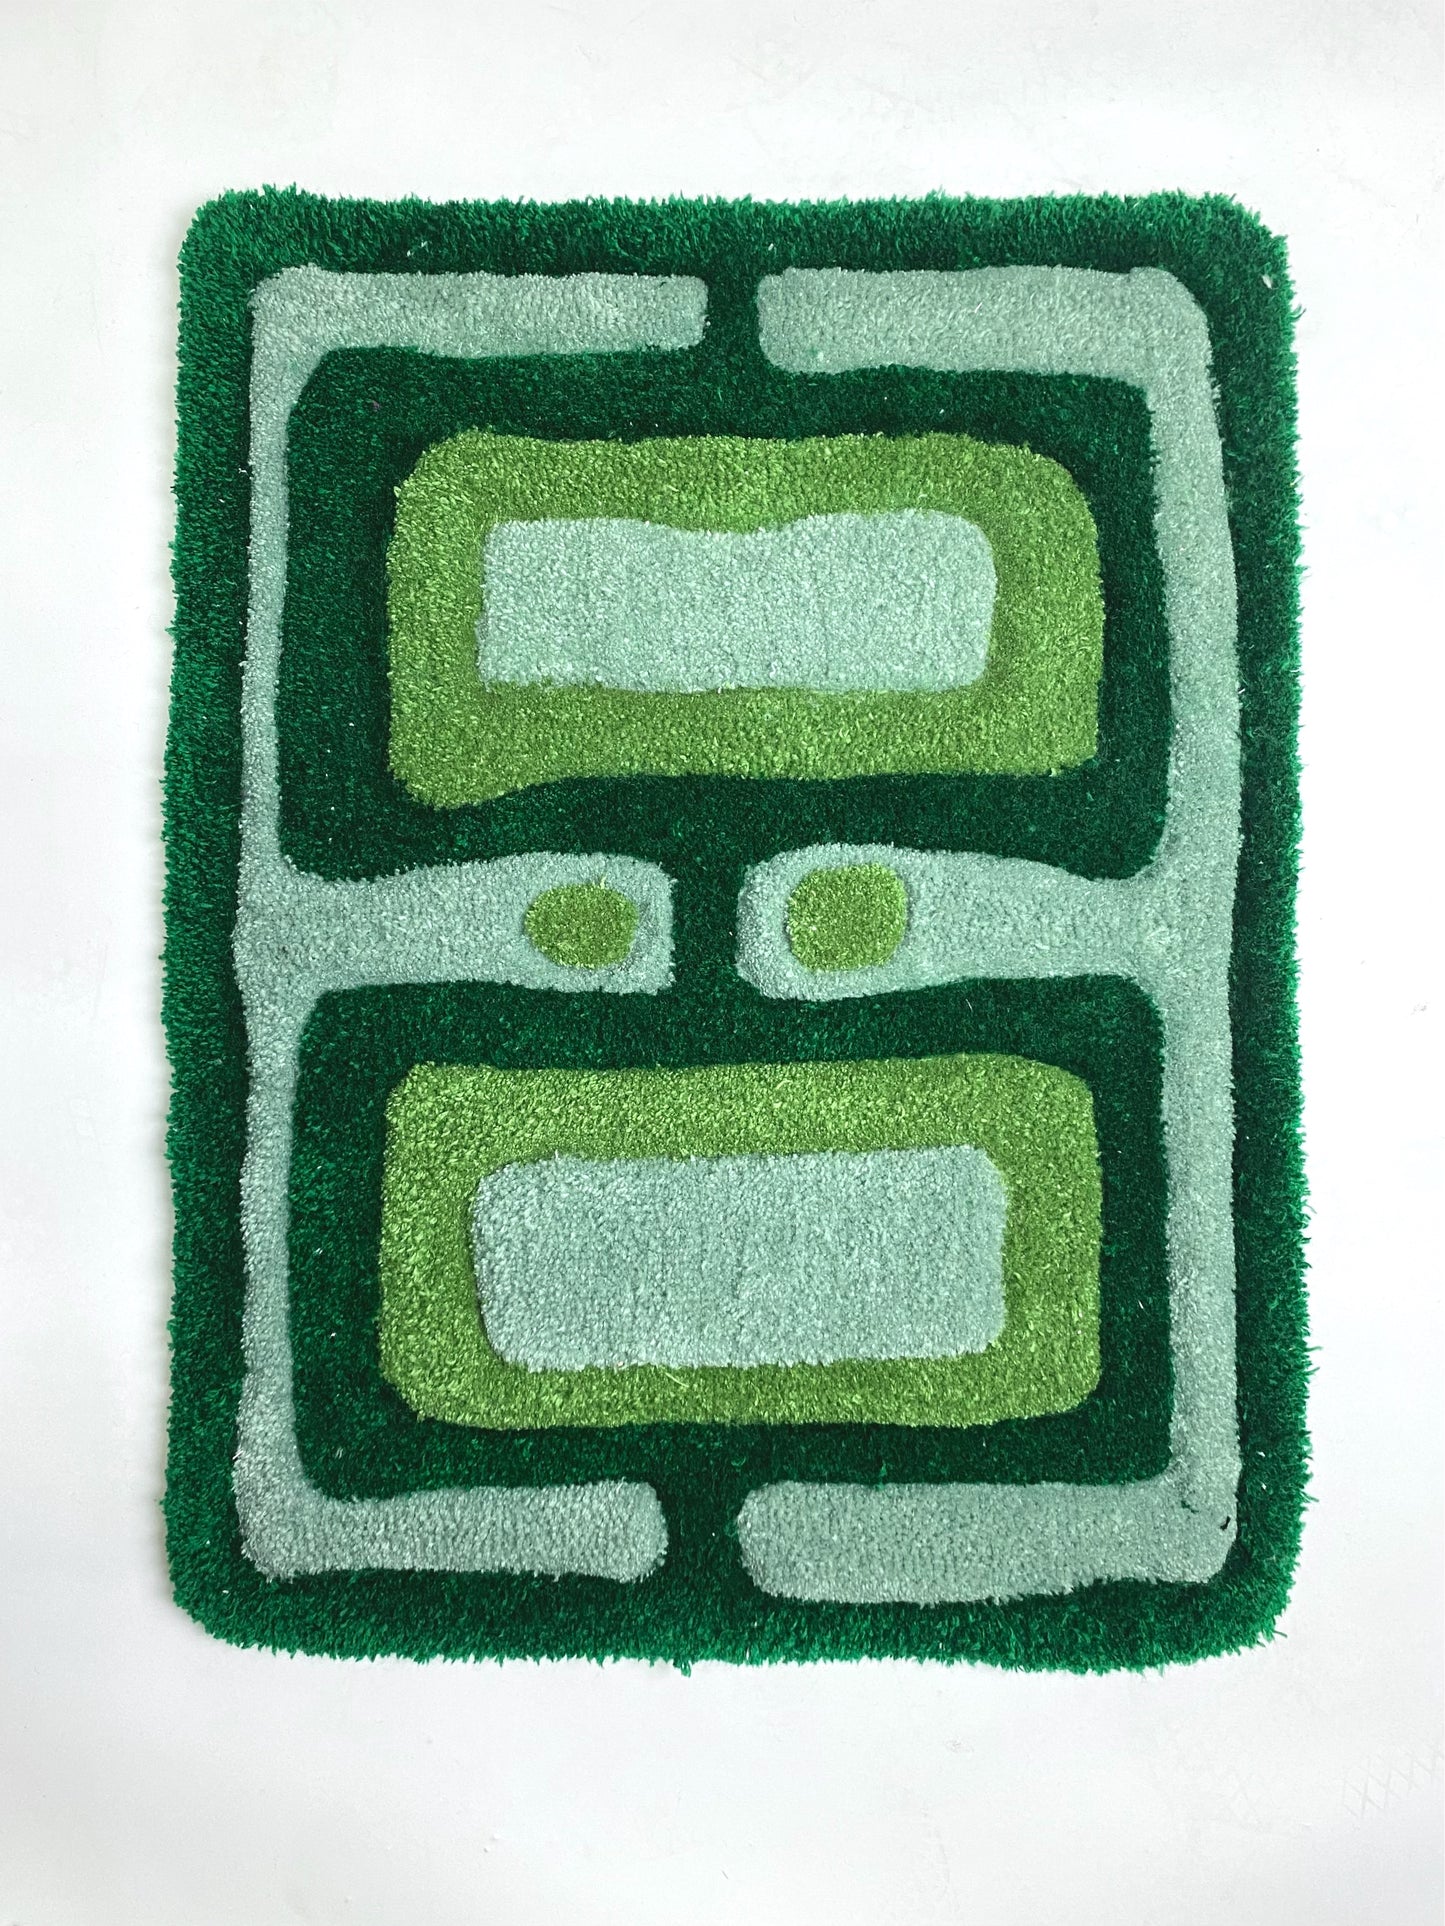 Lilly pad rug